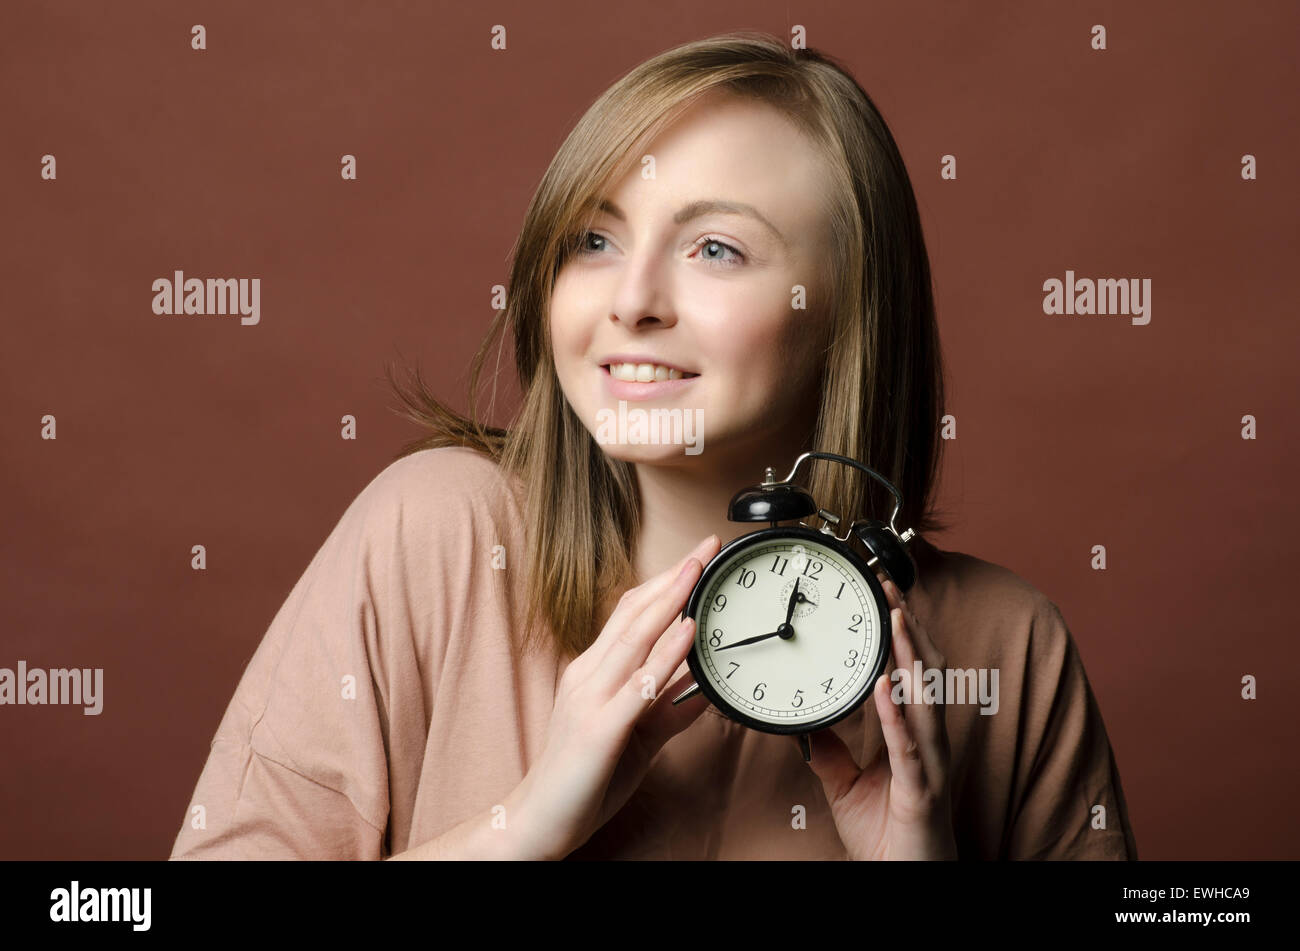 Punctual young woman holding an alarm clock Stock Photo